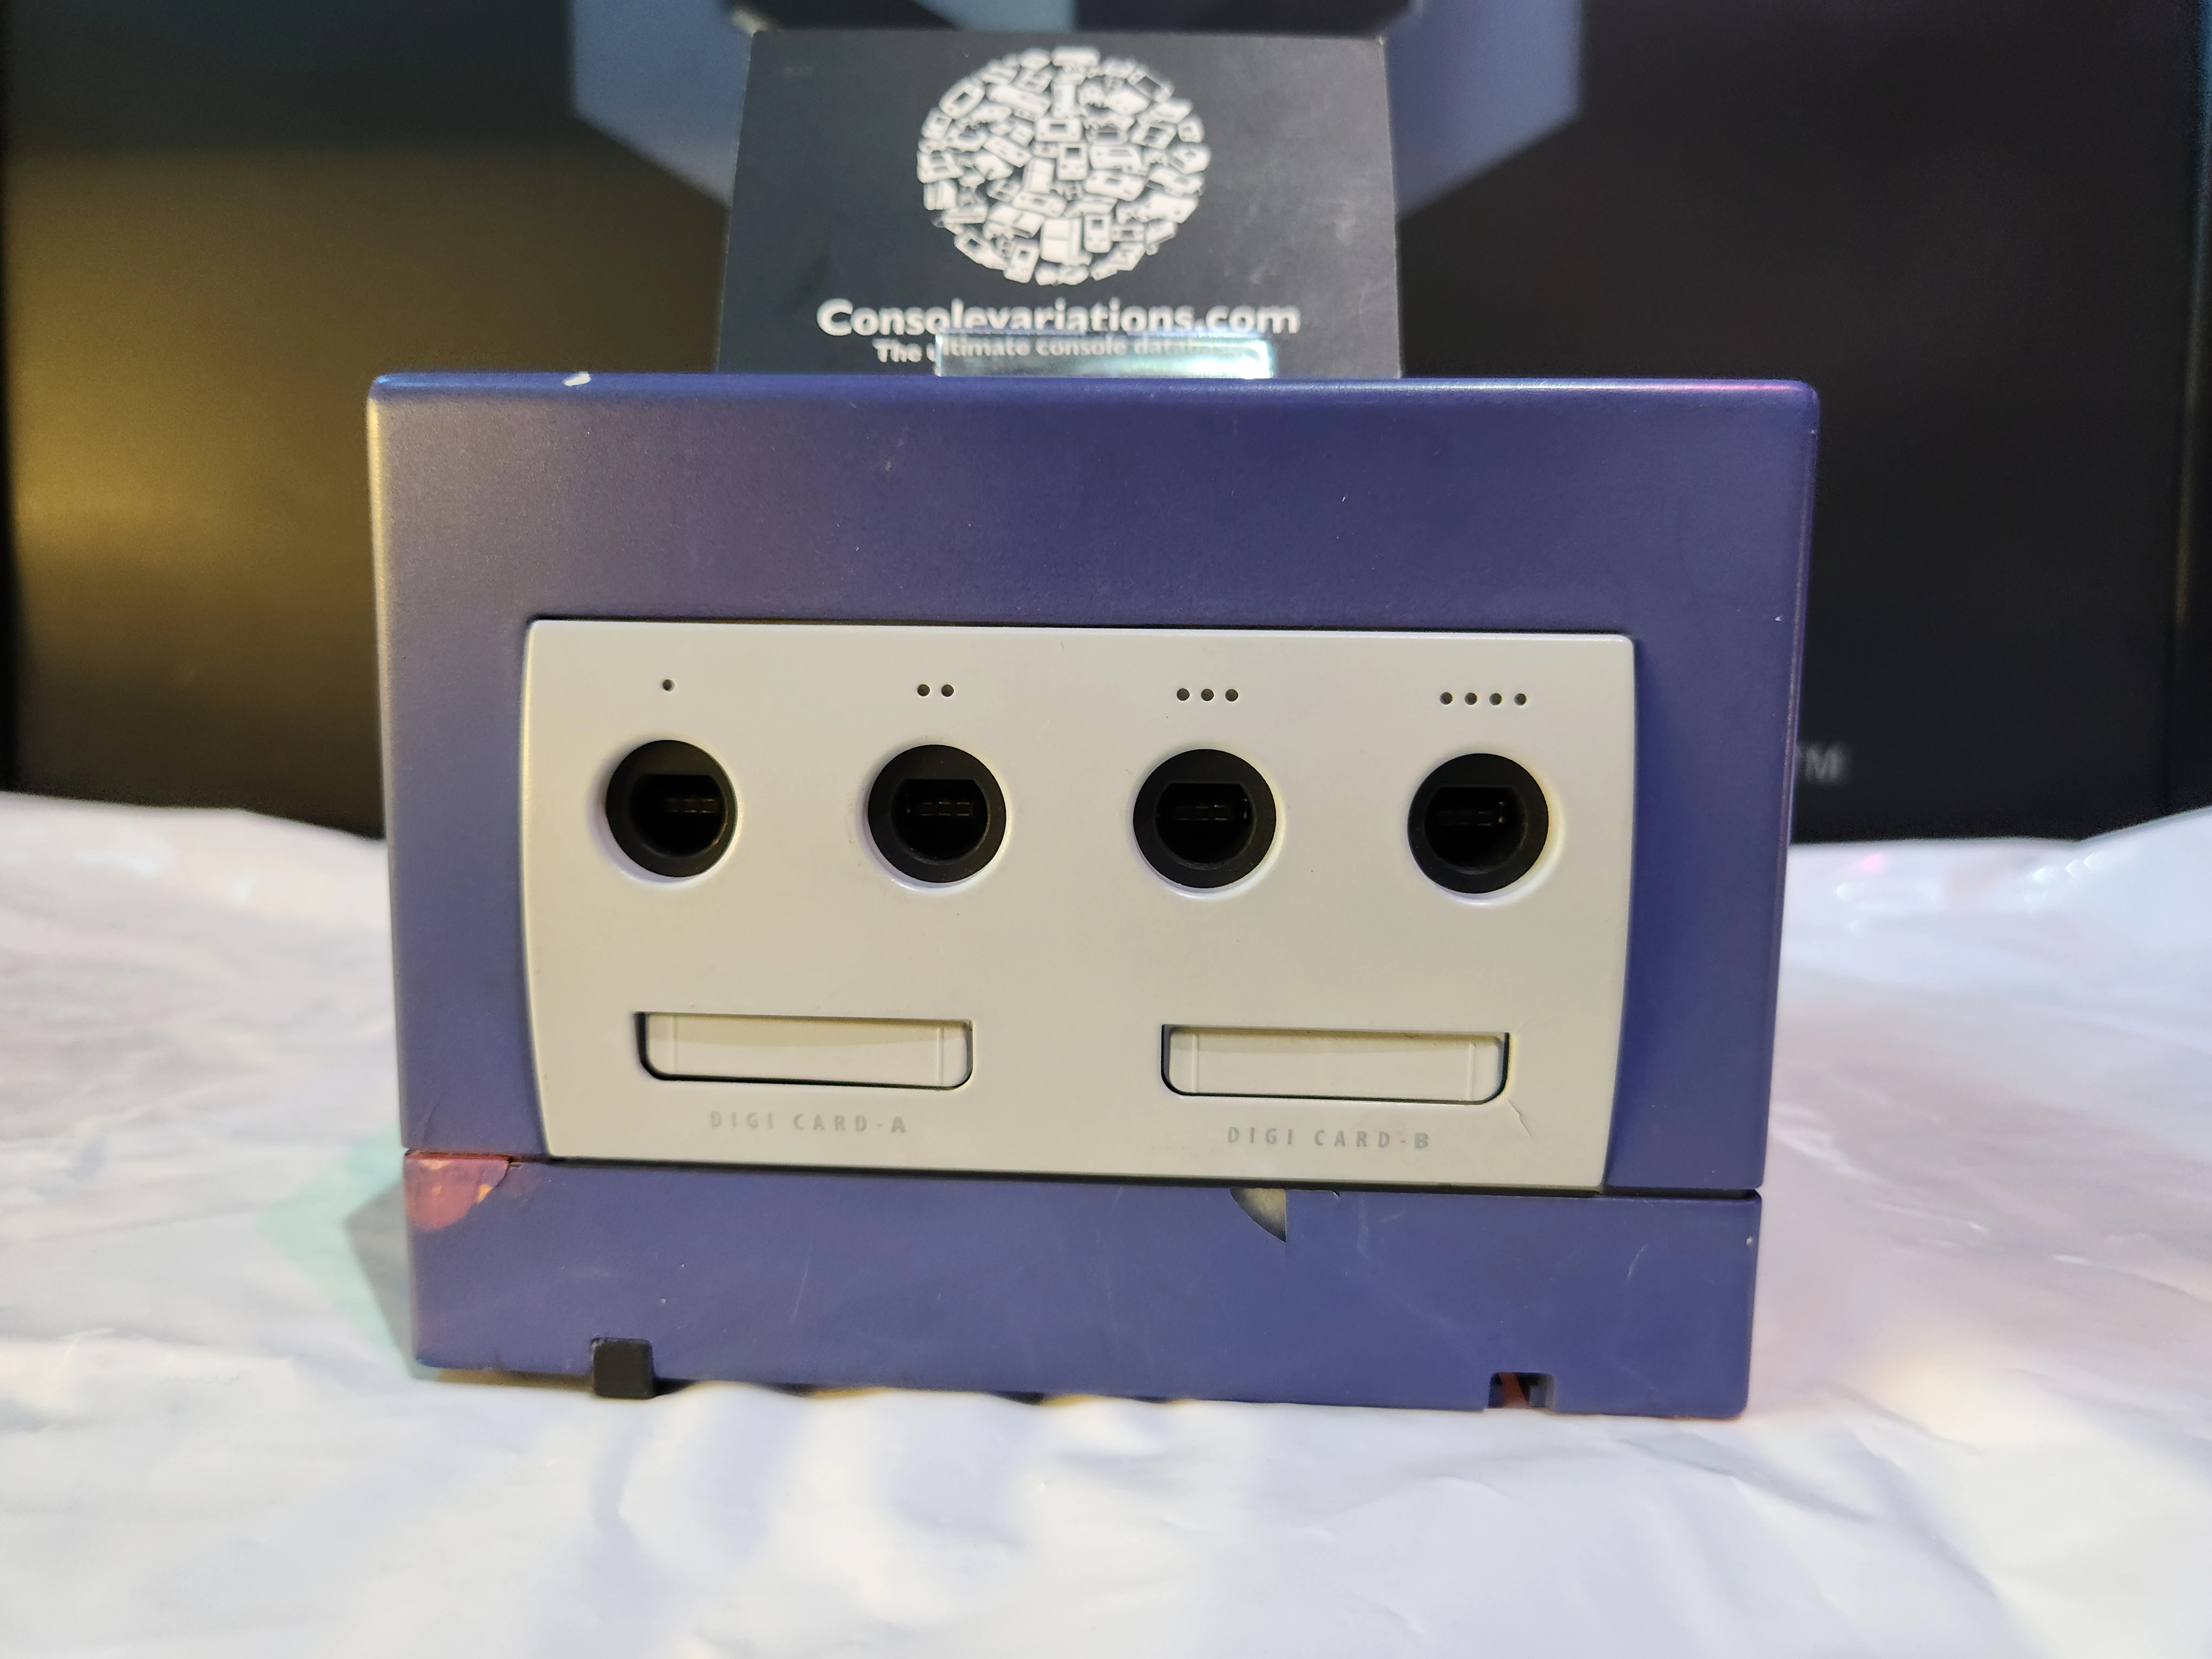 Spaceworld GameCube from the Front